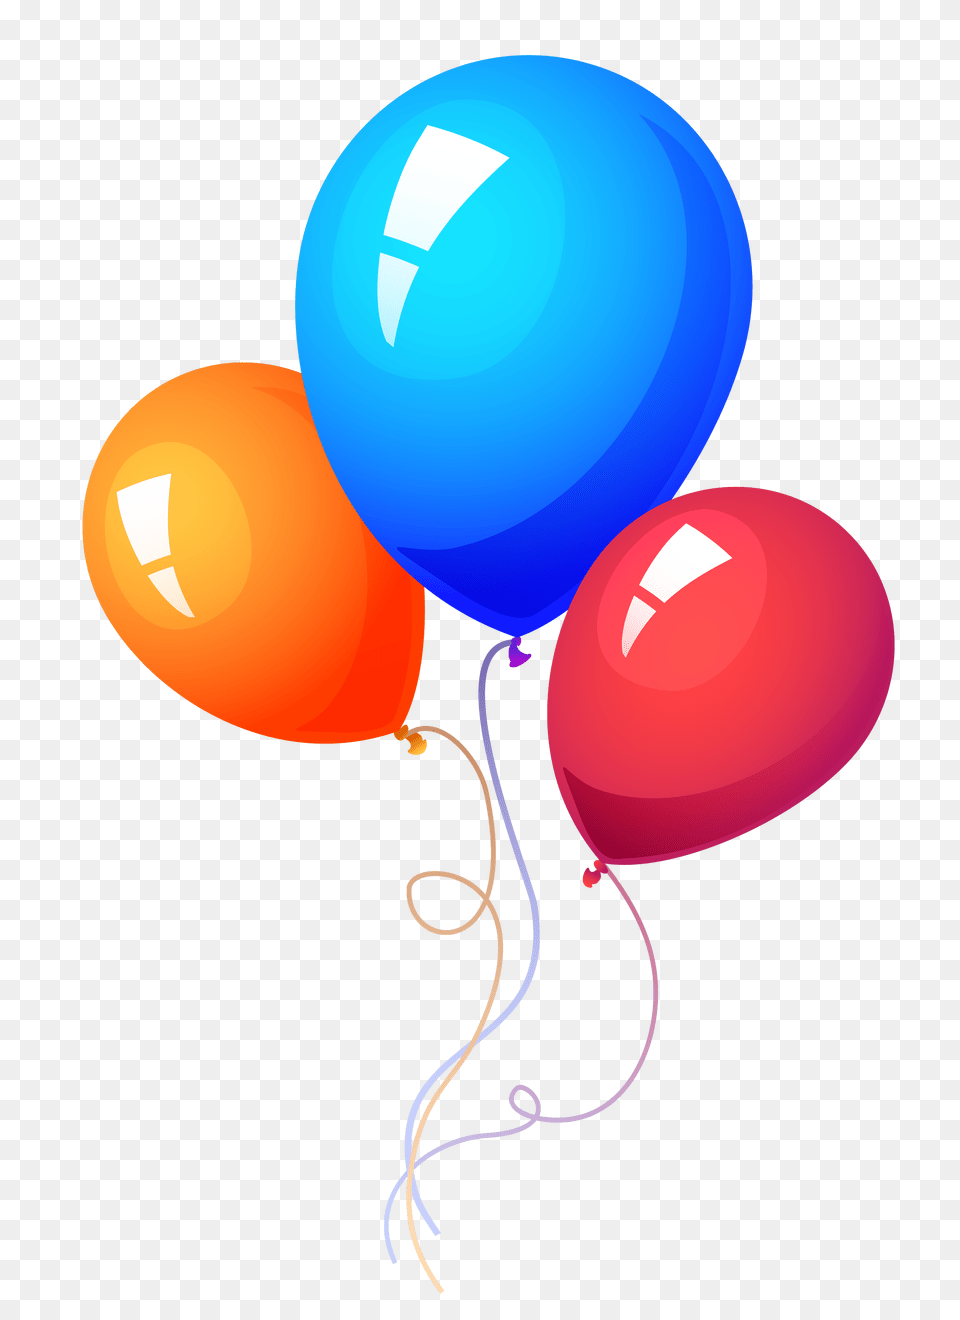 Pngpix Com Party Balloon Image, Dynamite, Weapon Free Png Download